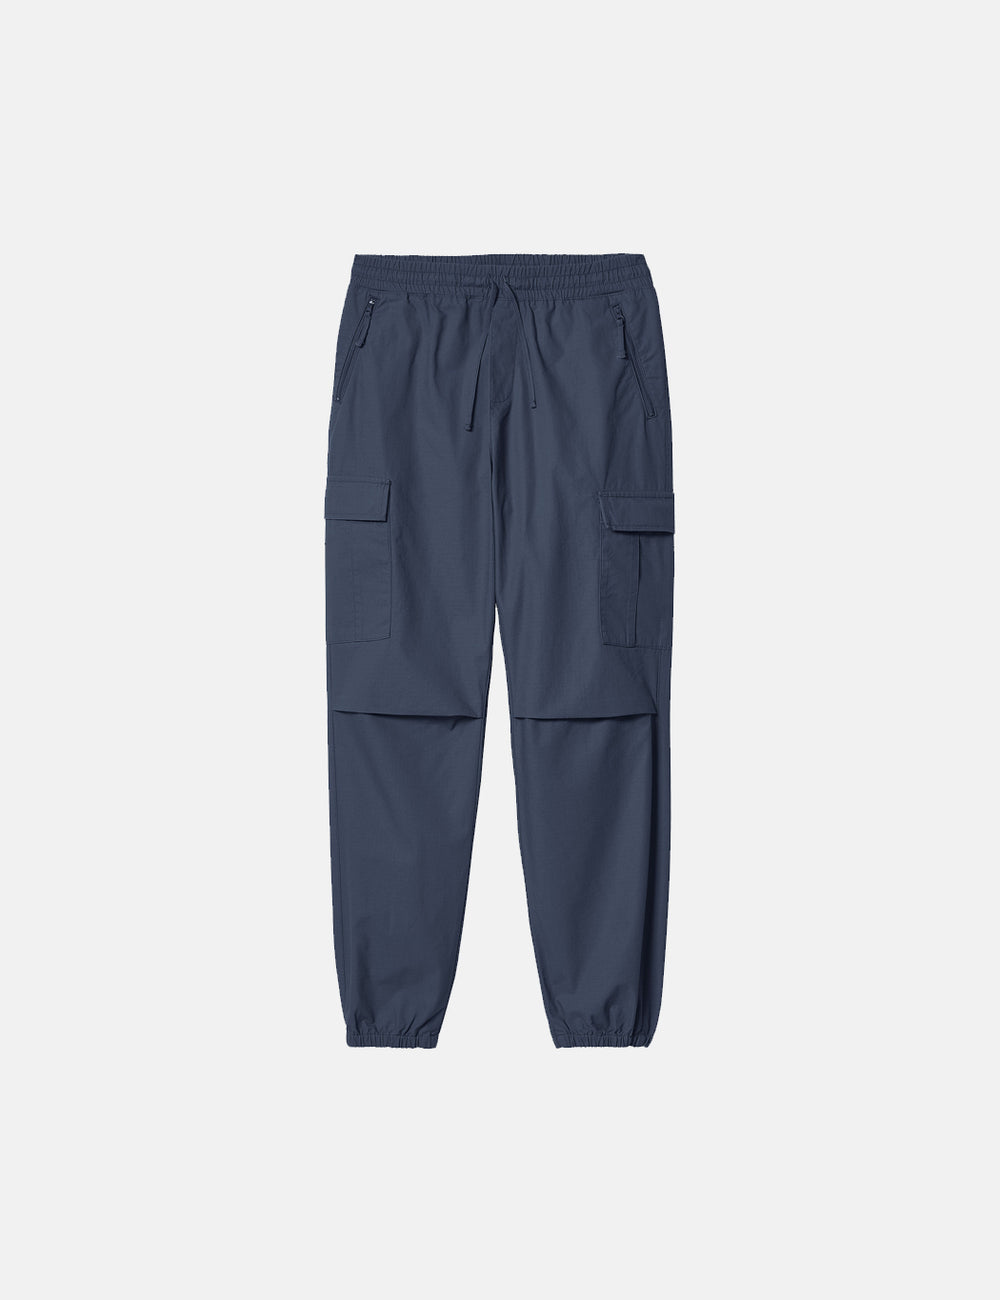 The Chase: Kids Joggers – Bailey Blue